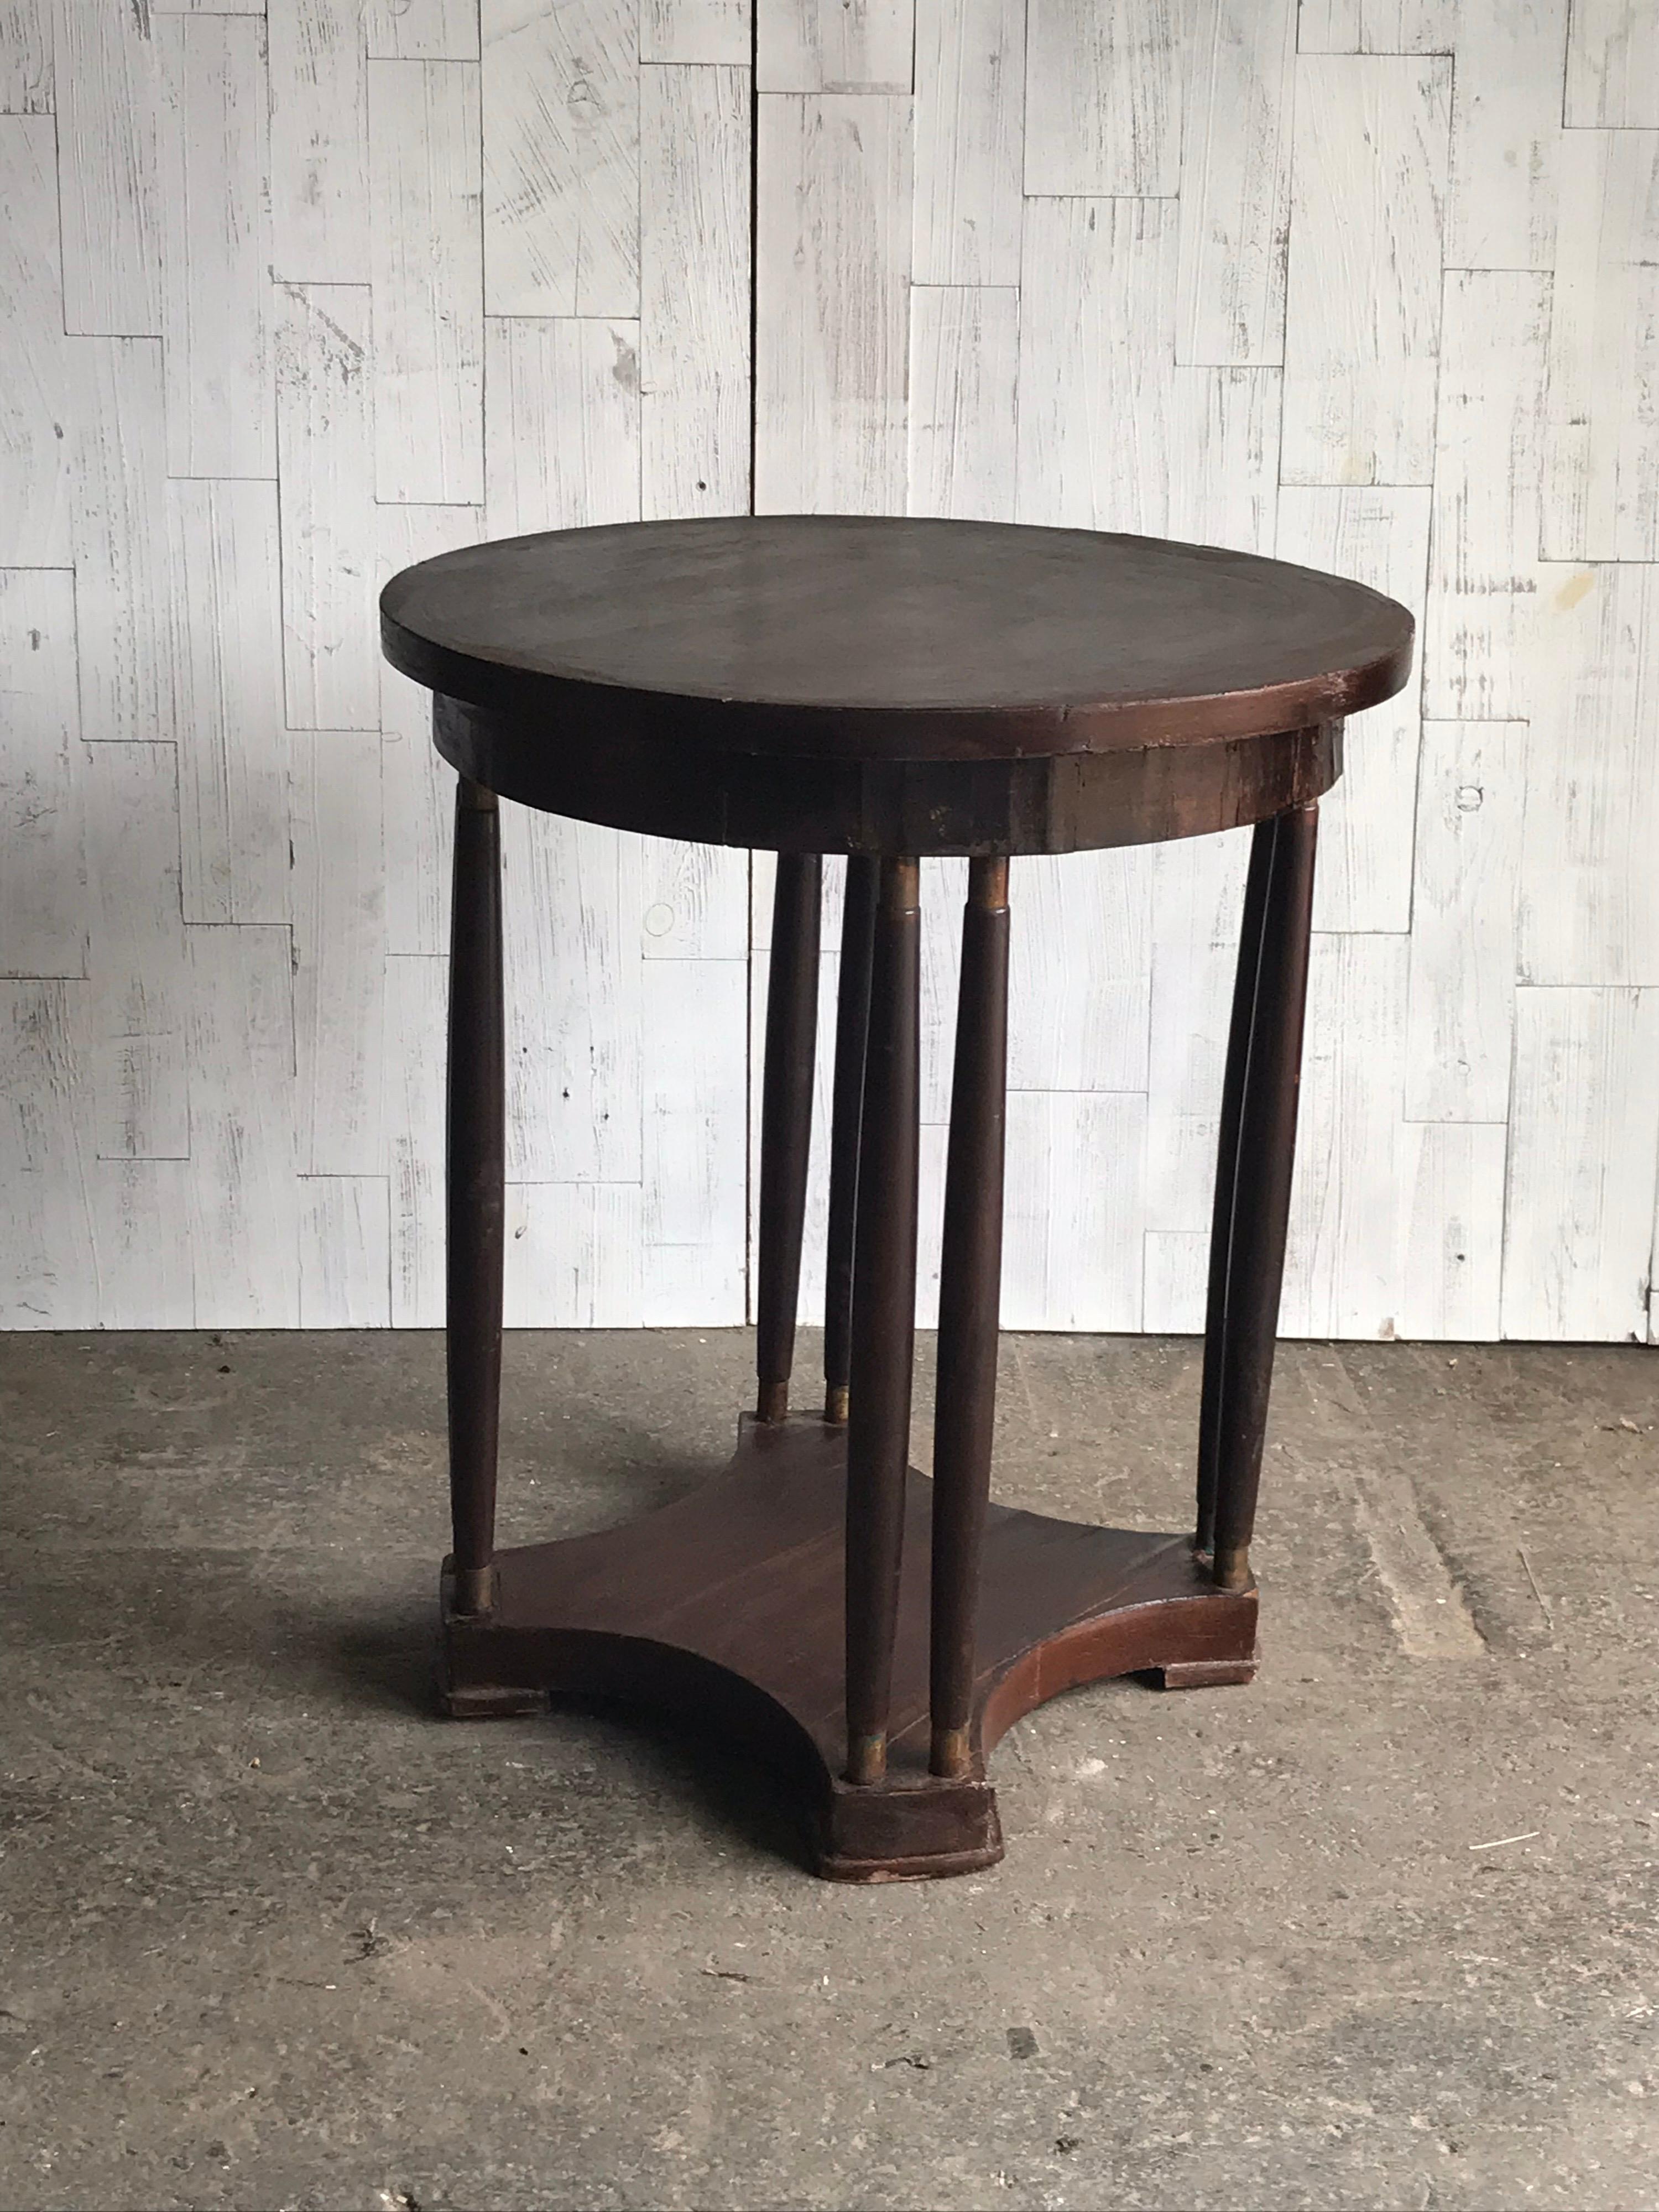 Art Nouveau side table mahogany, Hungary circa 1920
Original good condition.
It is possible to completely renovate
Size: 66Q77 H.